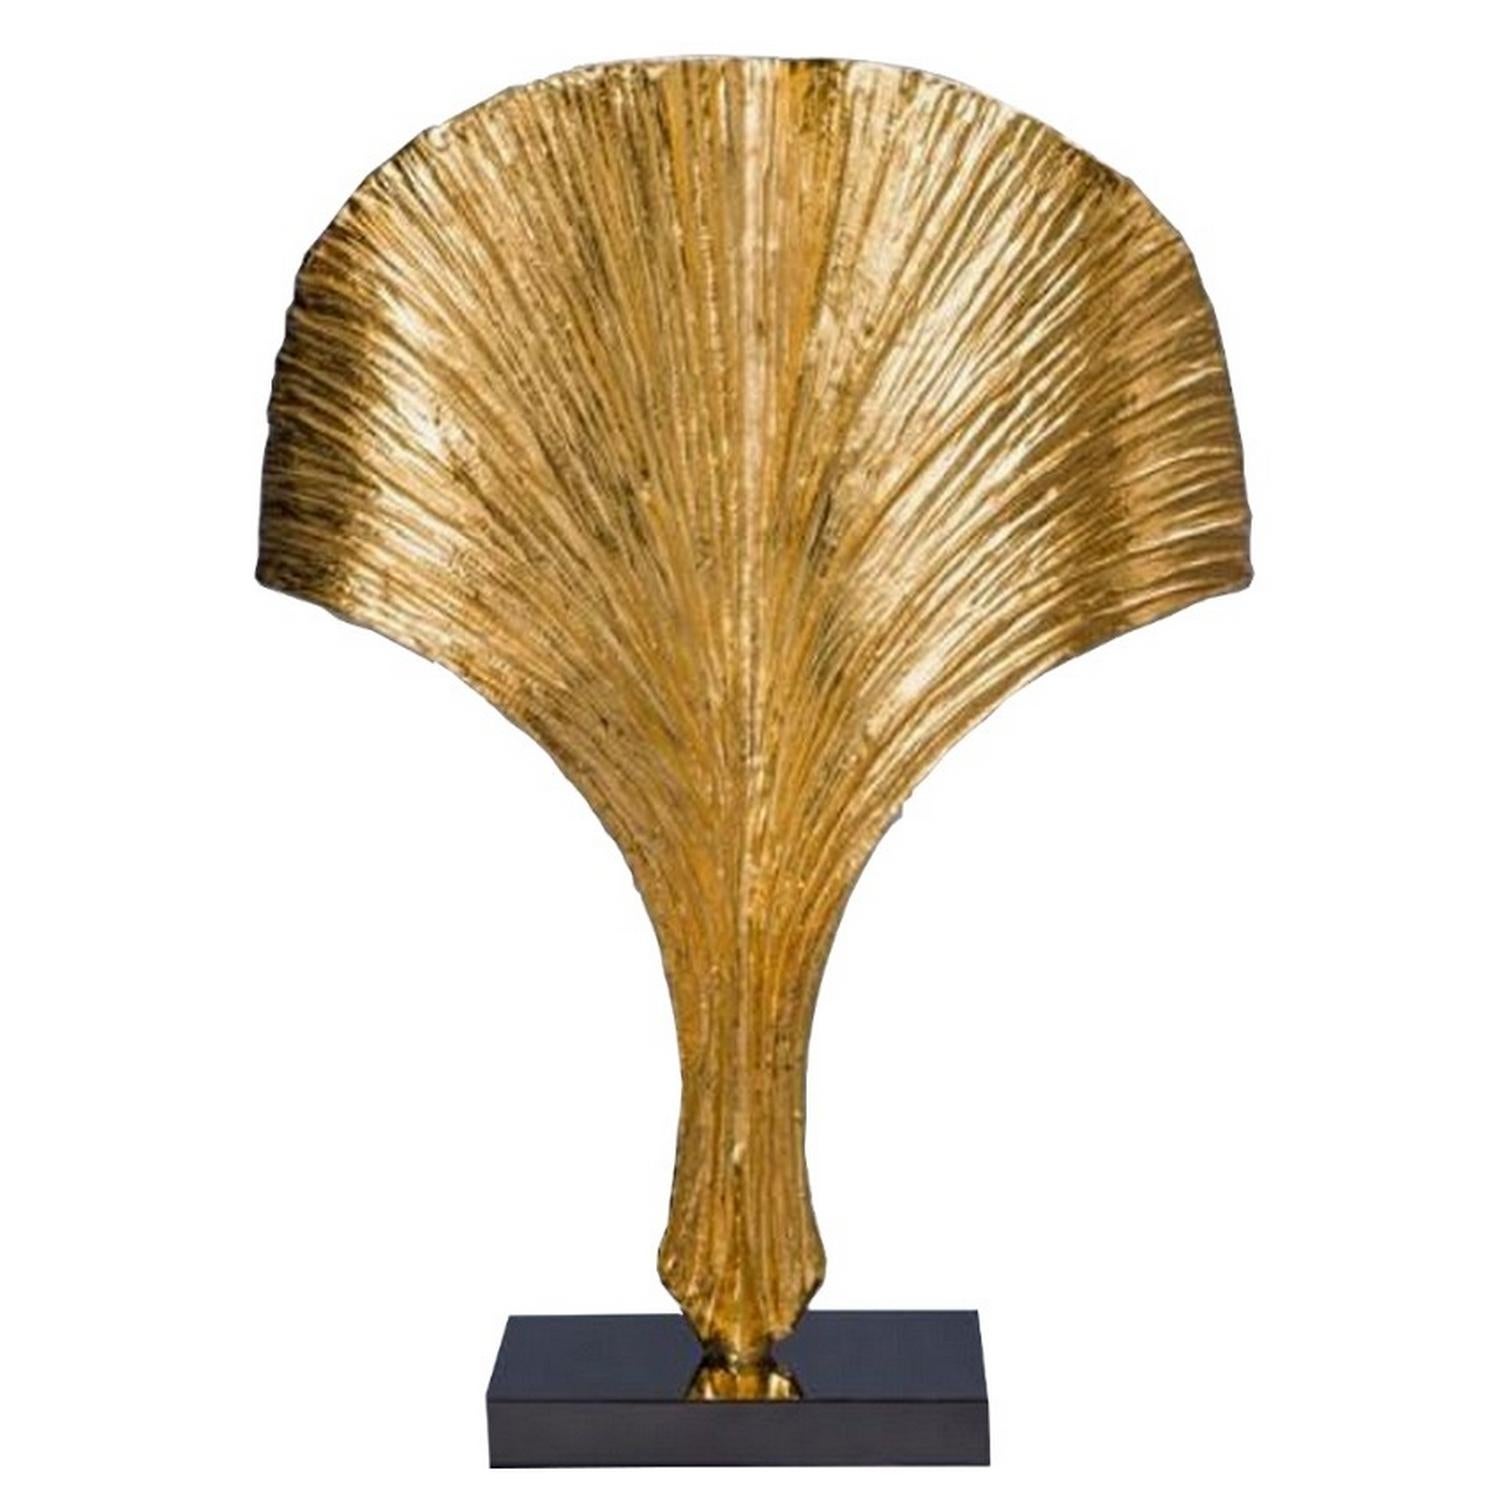 Table lamp “Nil” by Christiane Charles, circa 1970.
Socle in brass with a black nickel finish, structure in cast bronze with gold.

Winner of the Gold Medal of the Ecole Supérieure Nationale des Beaux-arts, Christiane Charles is recognized as one